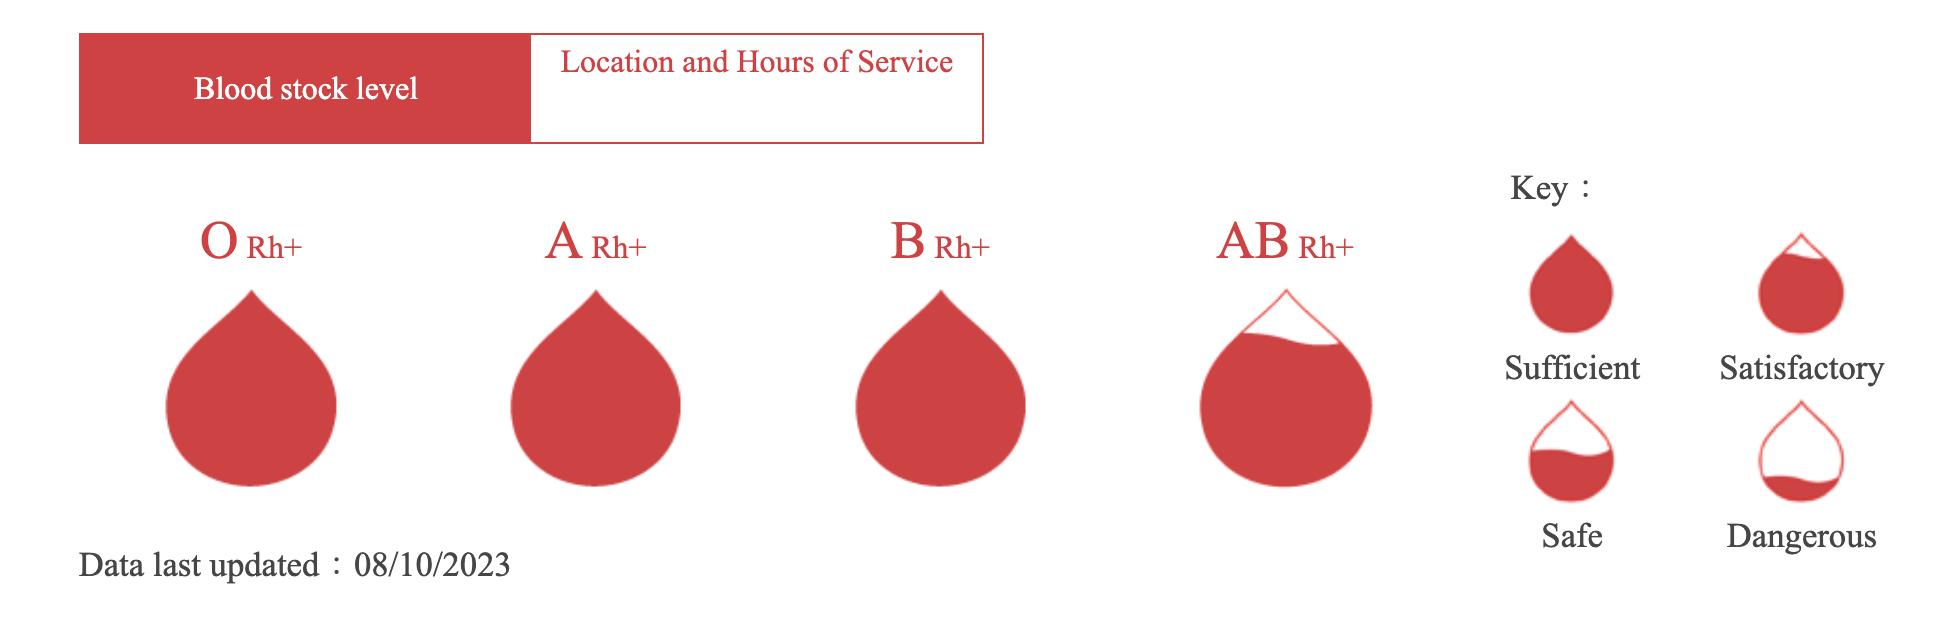 Macao Blood Transfusion Service's website